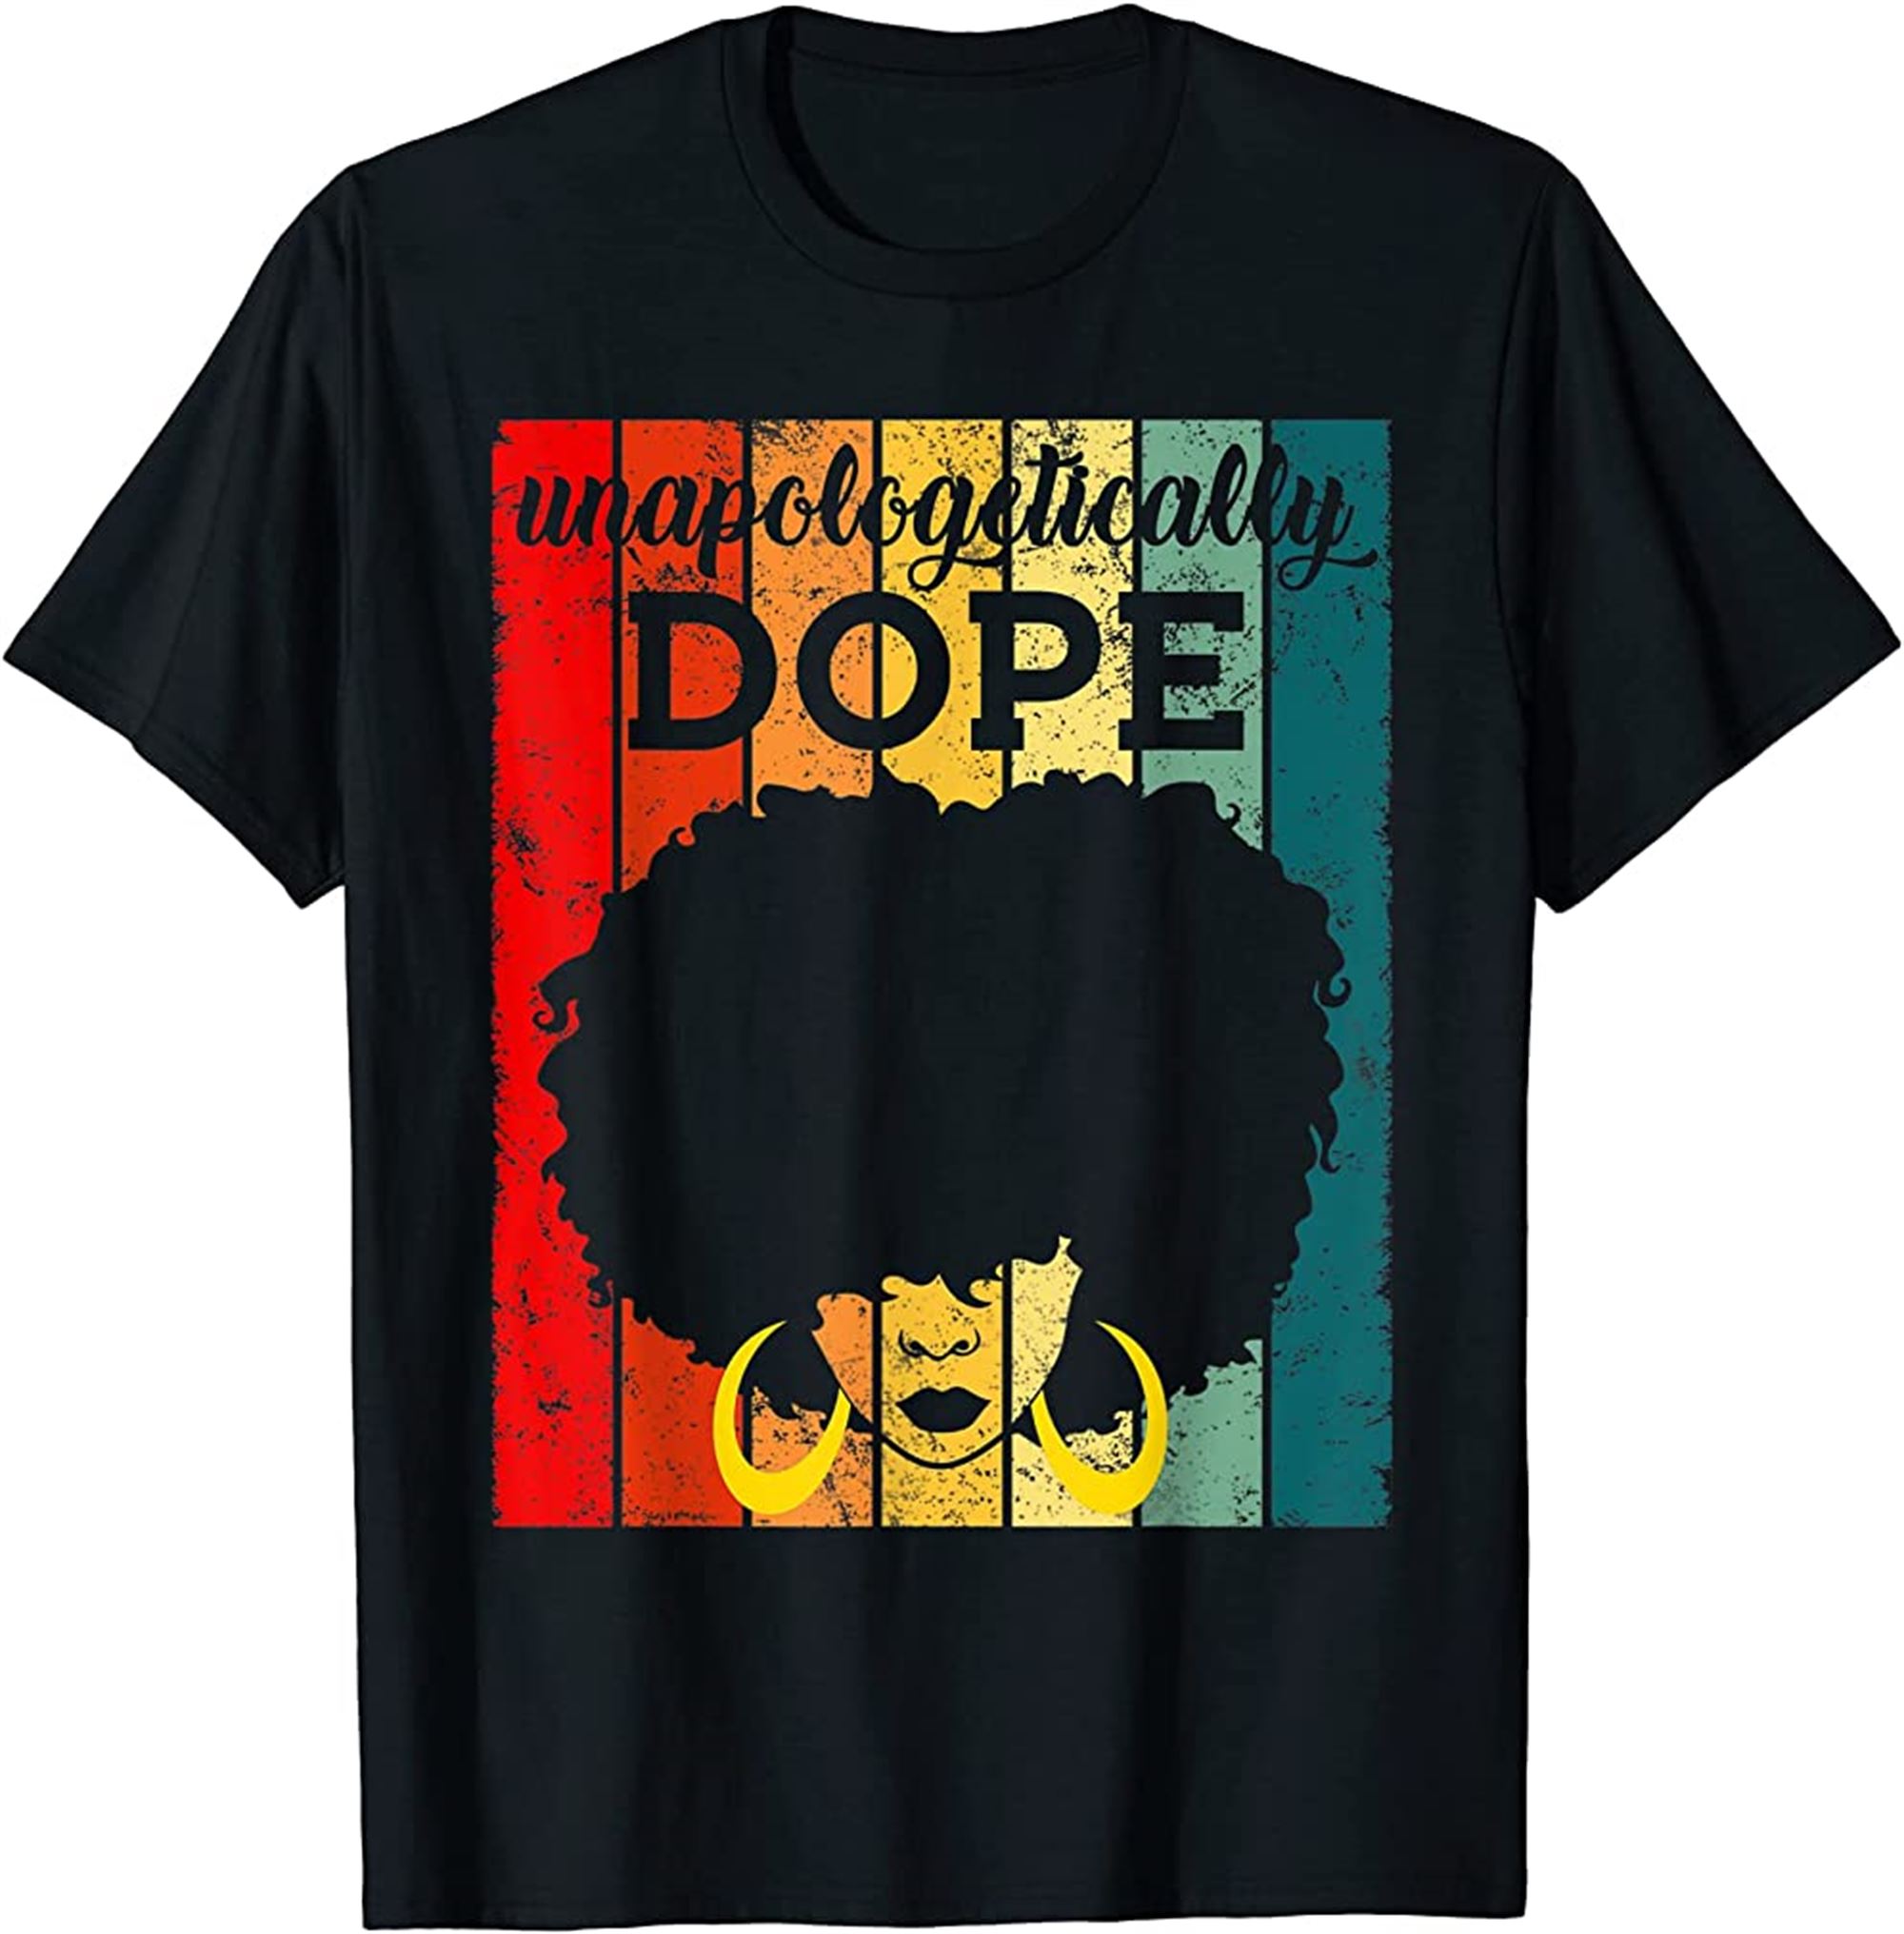 Retro Unapologetically Dope Black Afro History Juneteenth T-shirt Full Size Up To 5xl